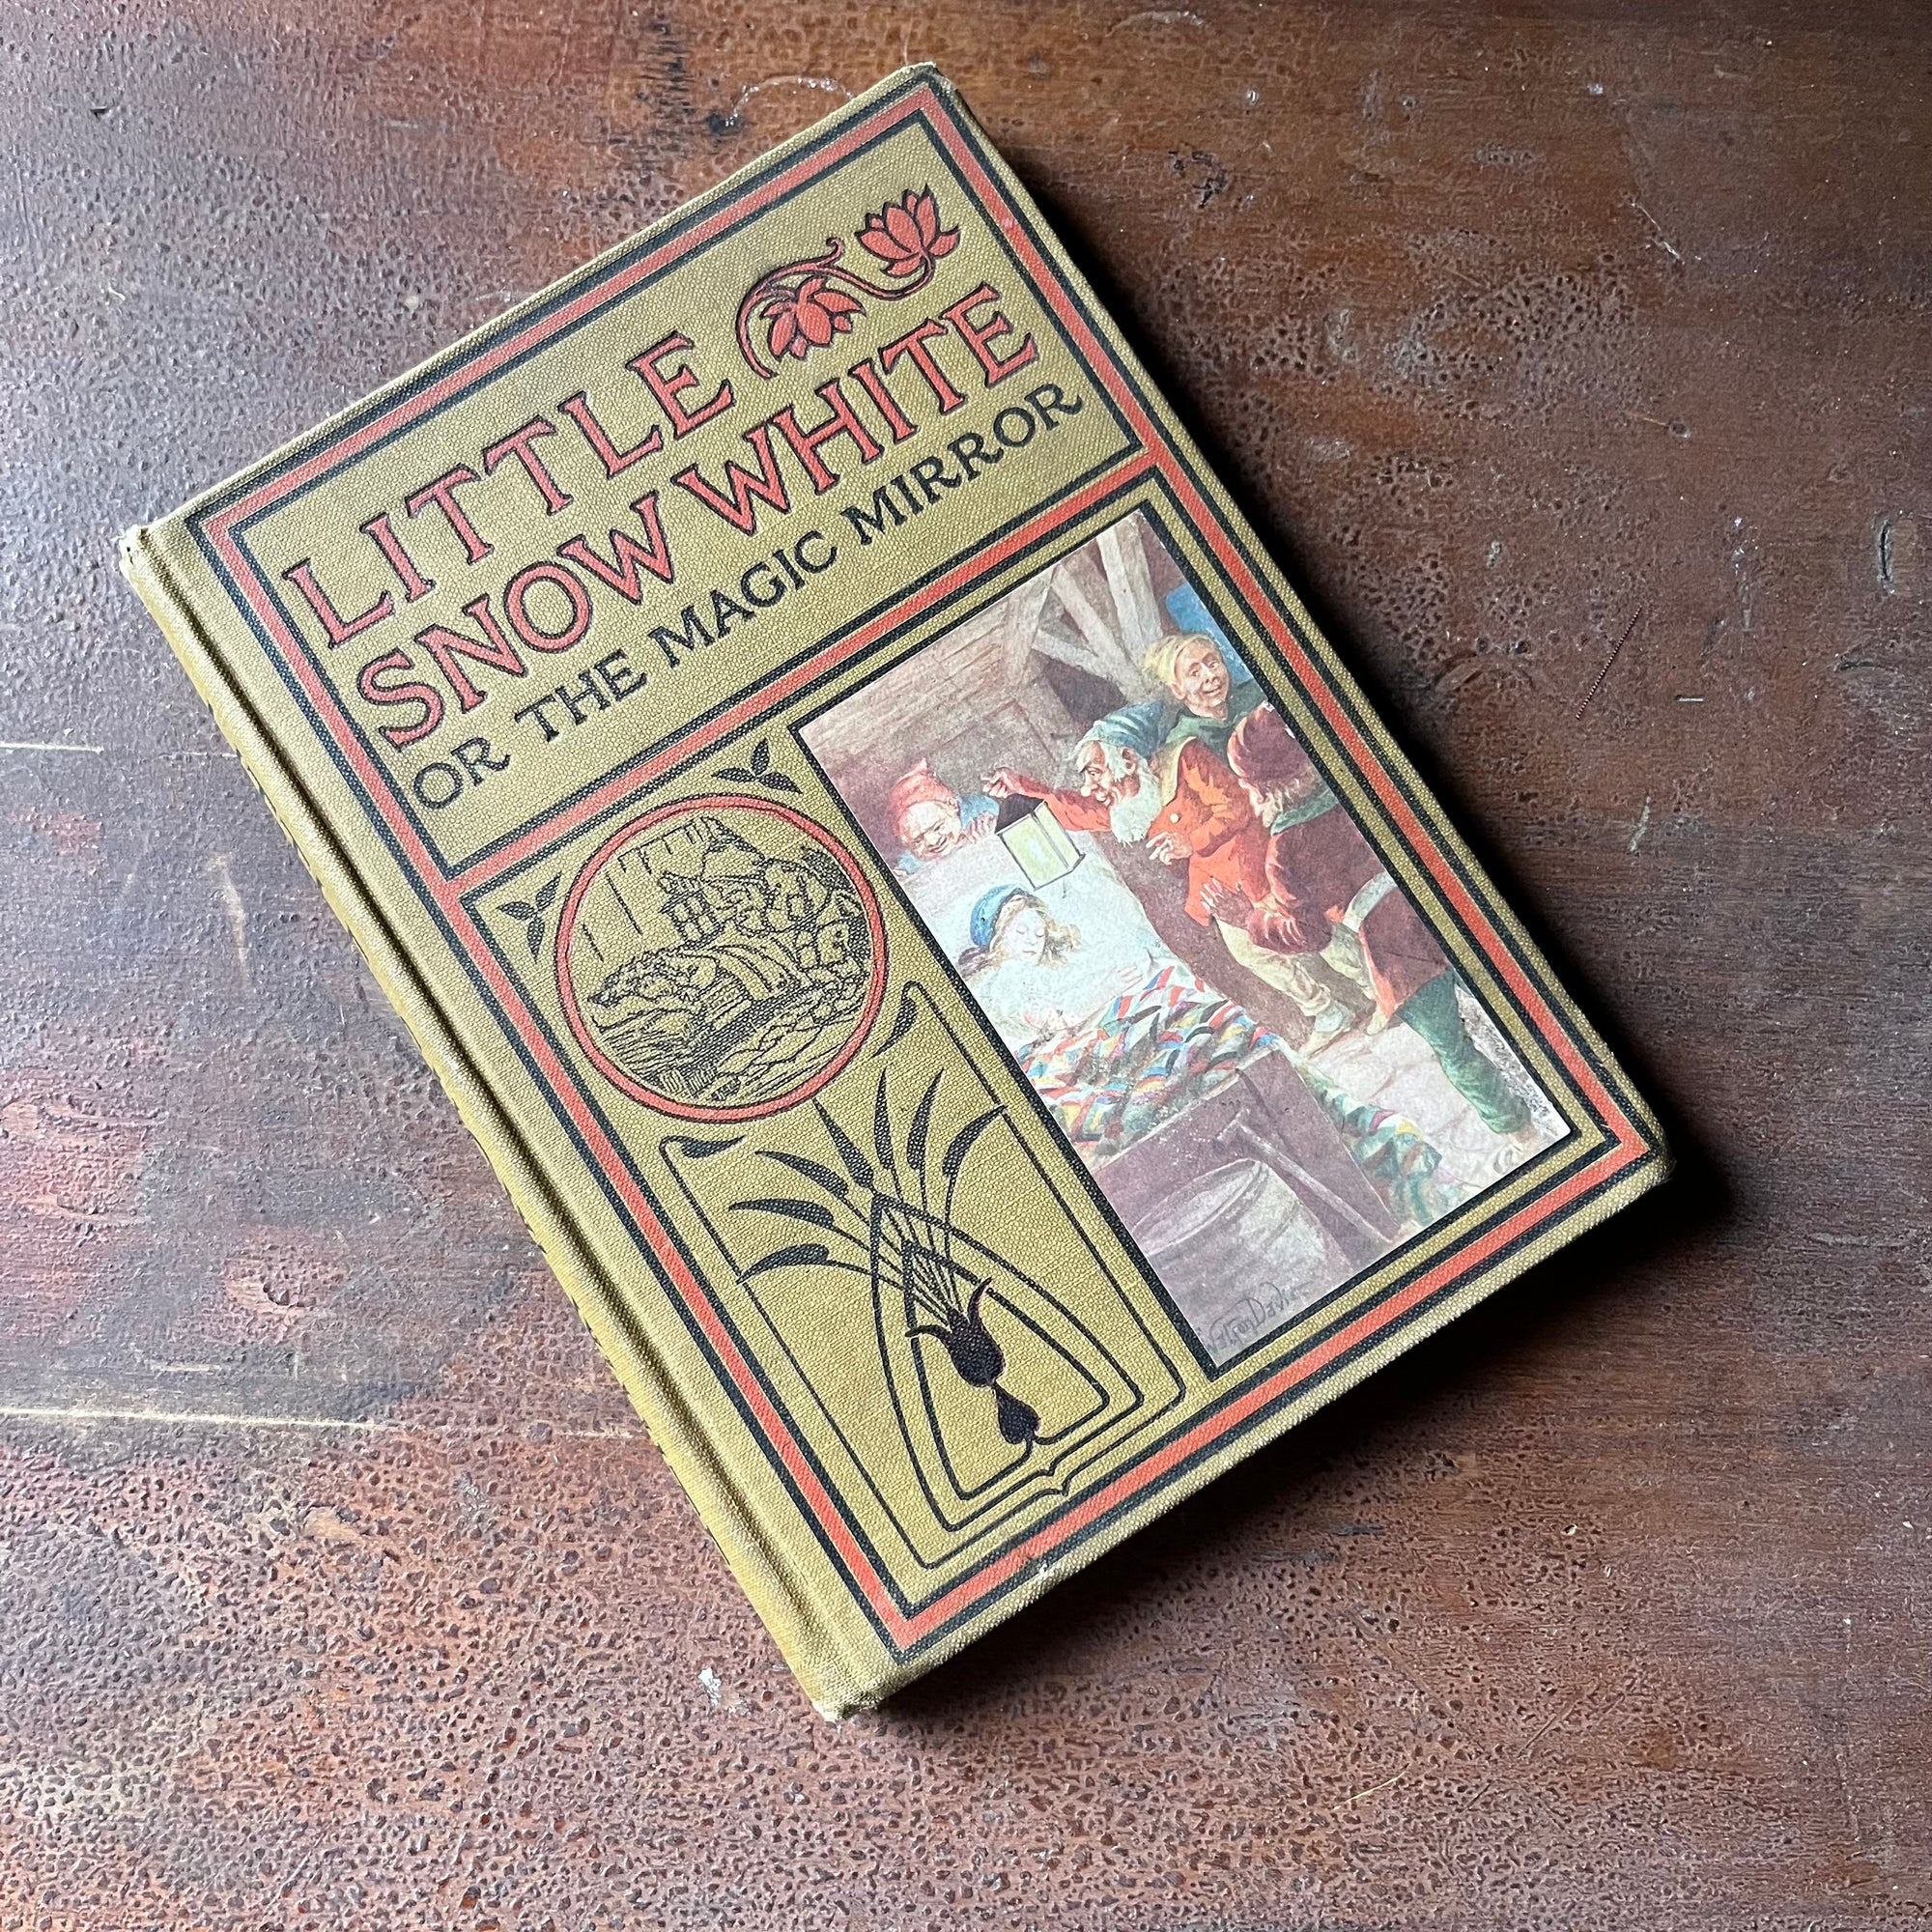 Little Snow White or the Magic Mirror - 1906 Edition - View of Embossed Cover